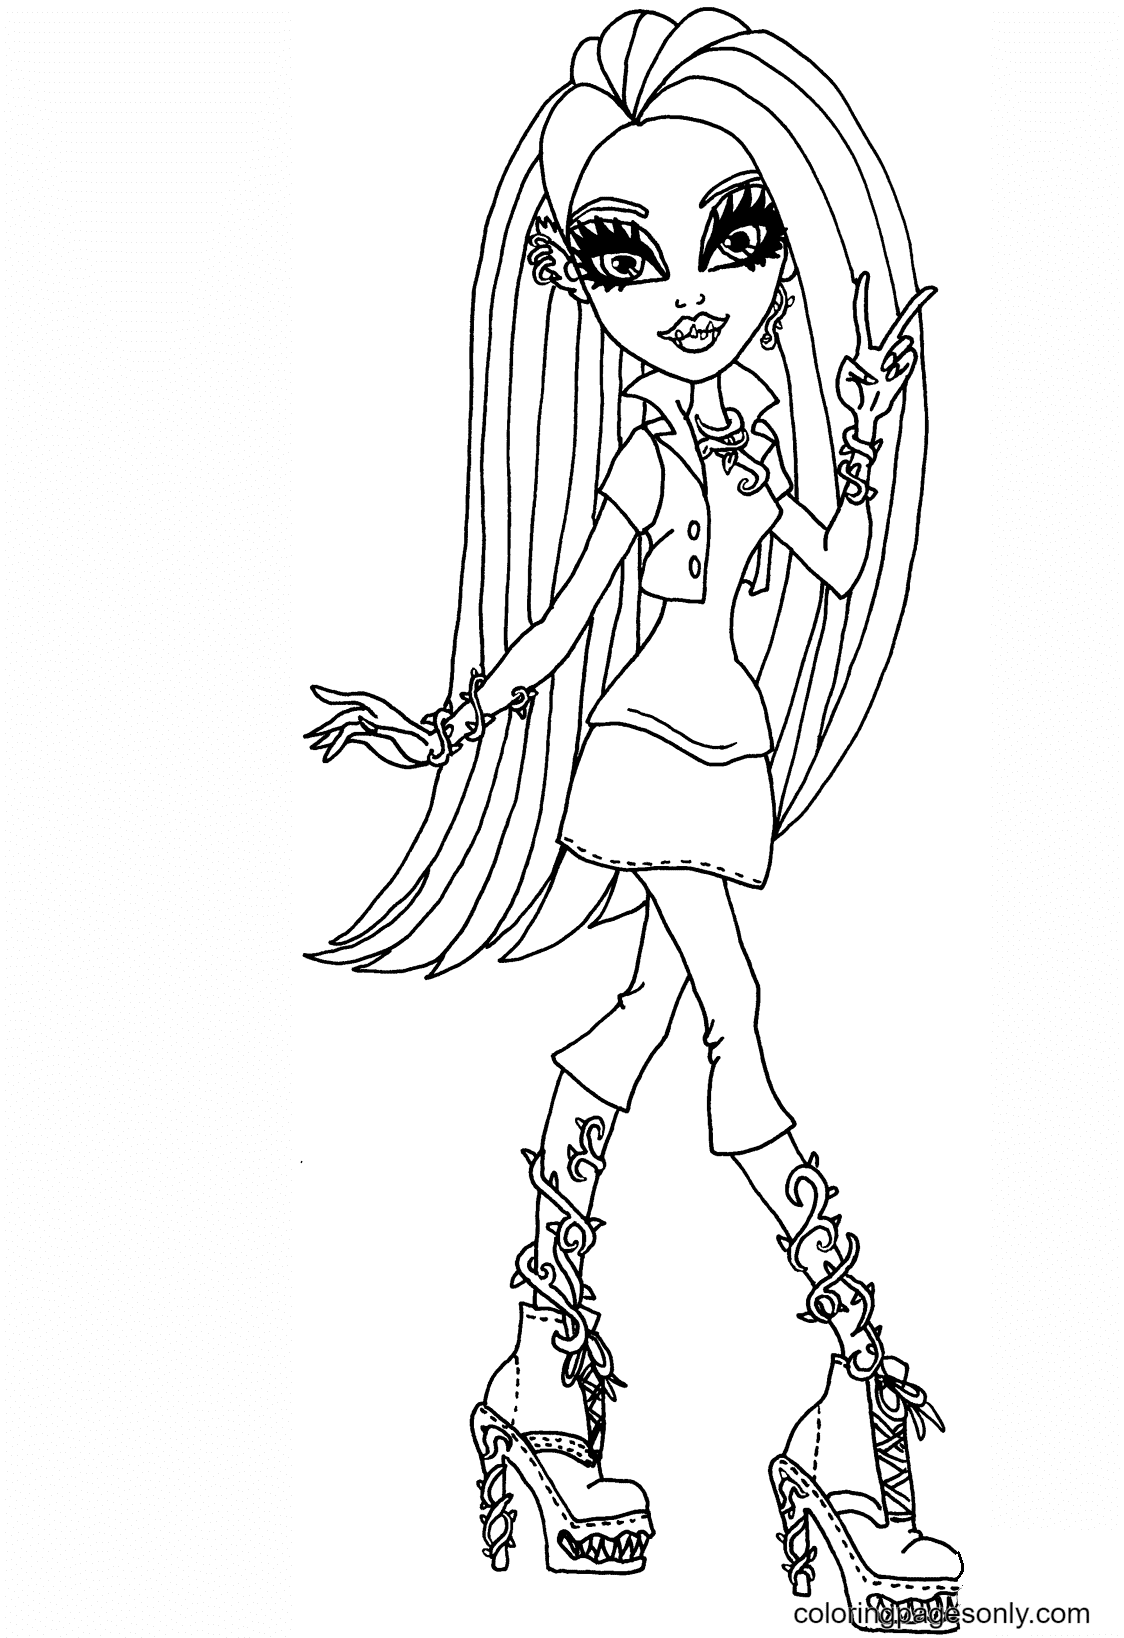 Monster High Coloring Pages - Free Printable Coloring Pages